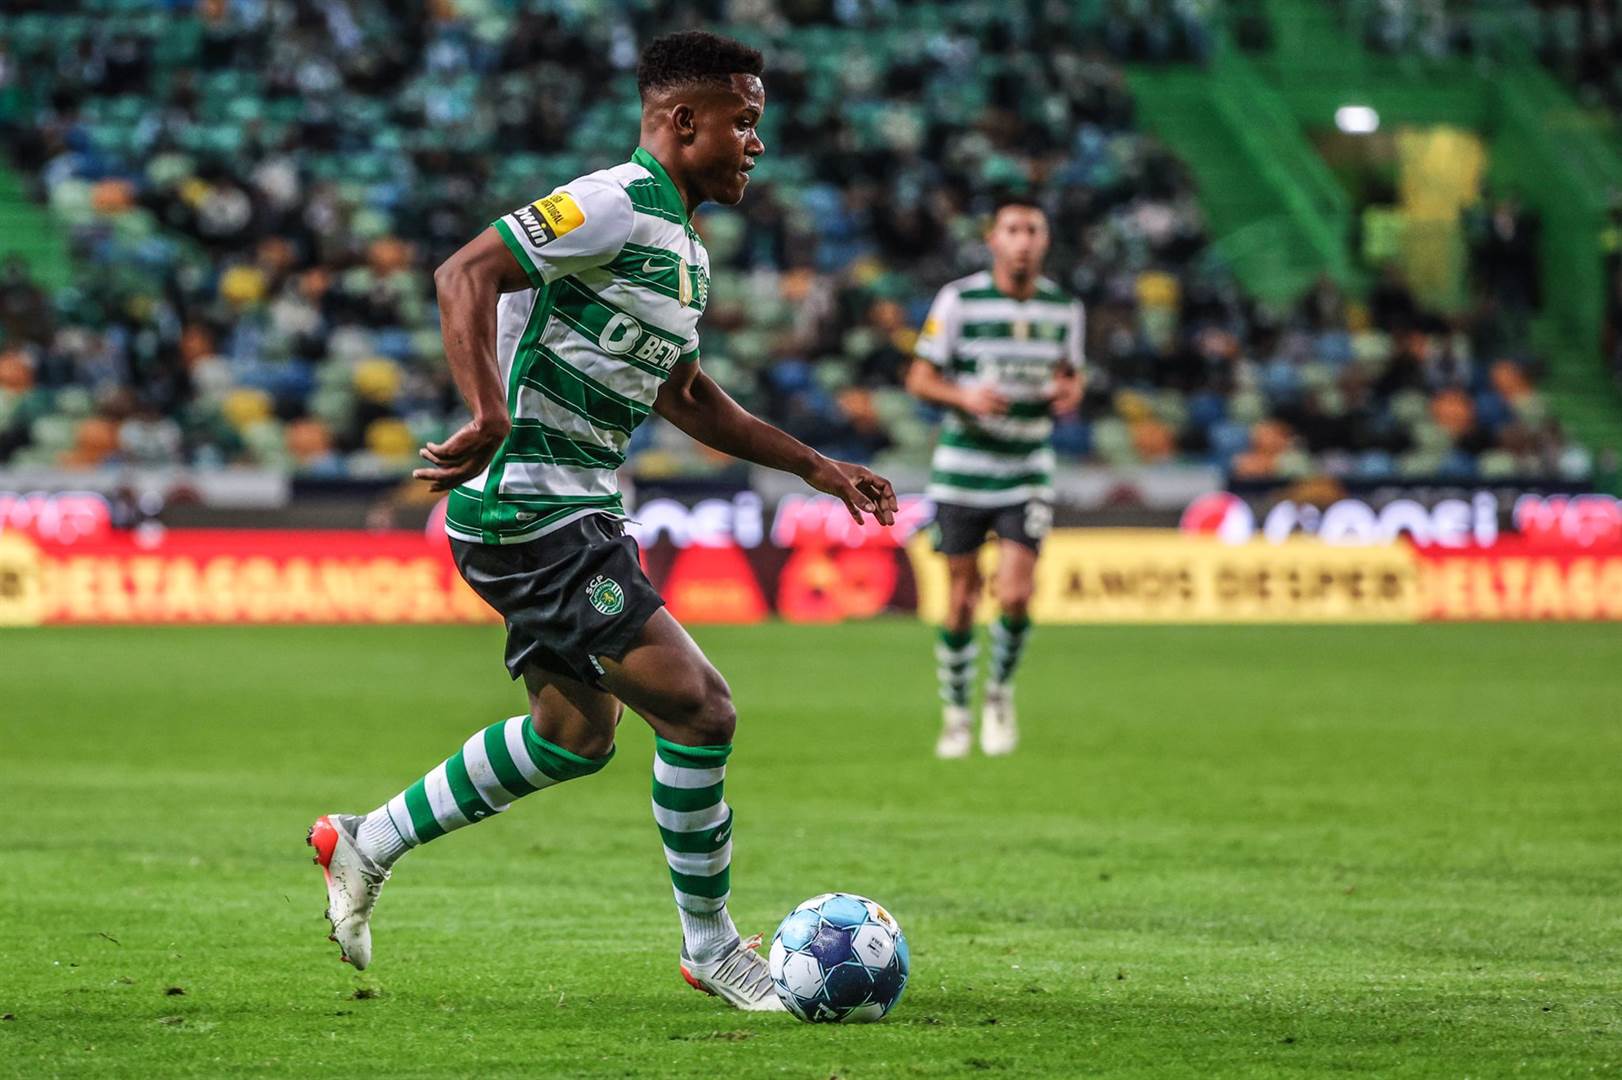 Geny Catamo snubbed in PSL yet signed by Sporting CP | KickOff